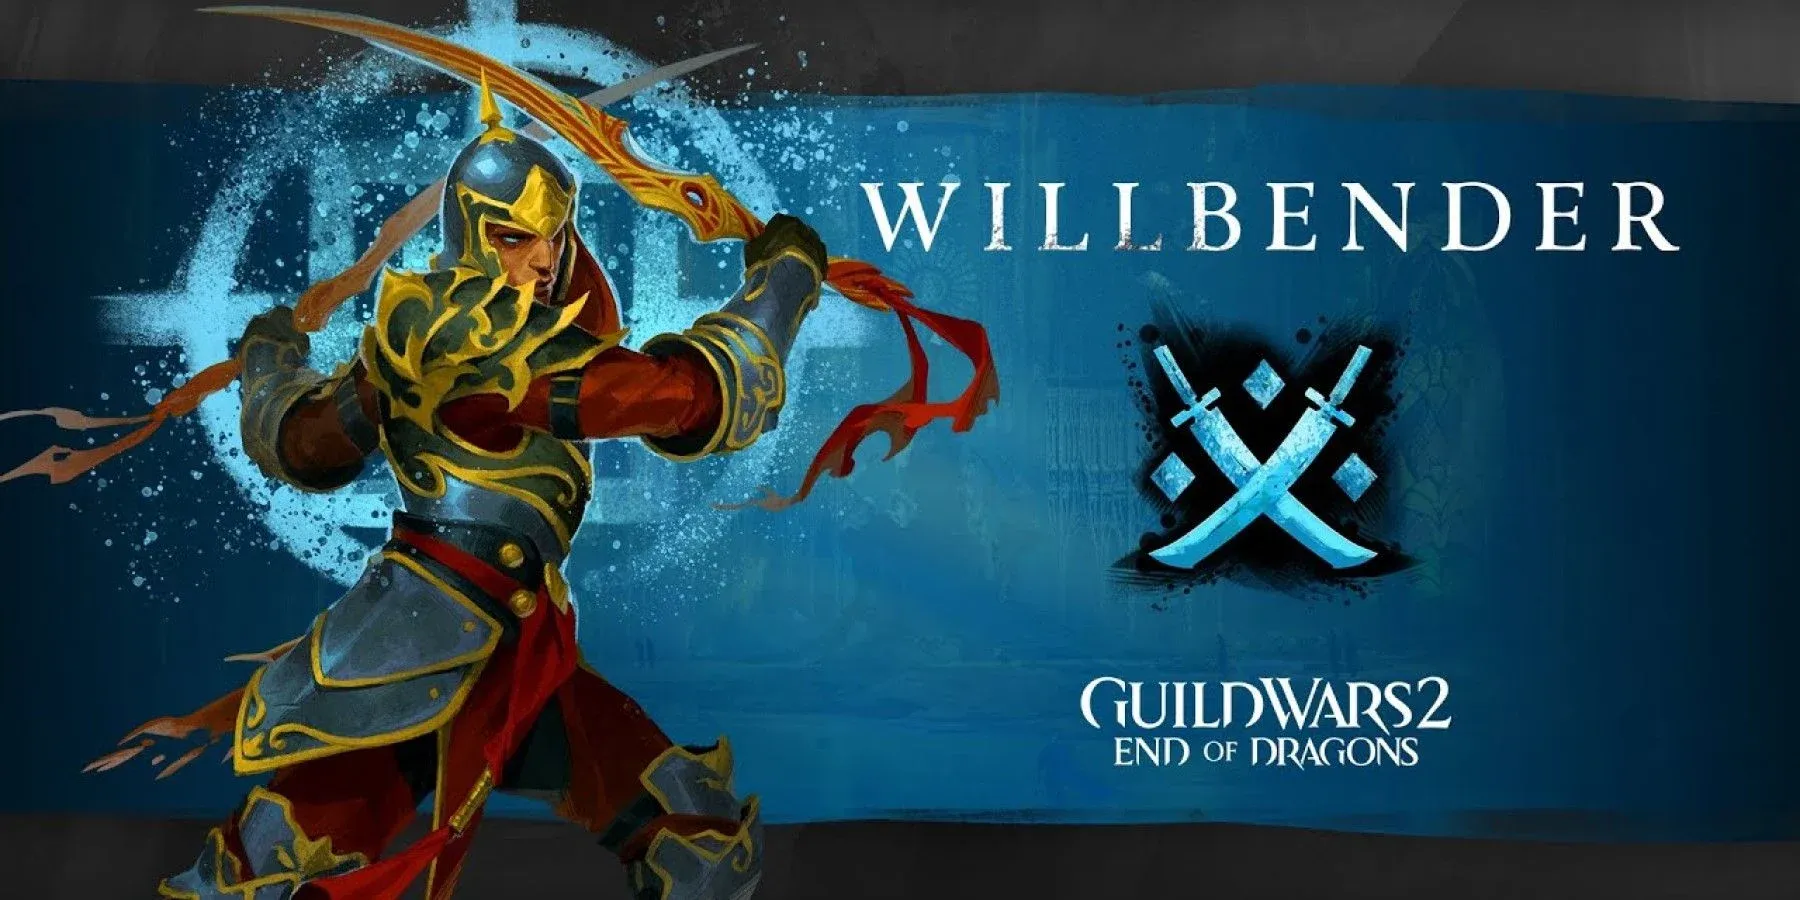 A human Willbender dual wields swords on a blue background, the class icon is to the right of the image